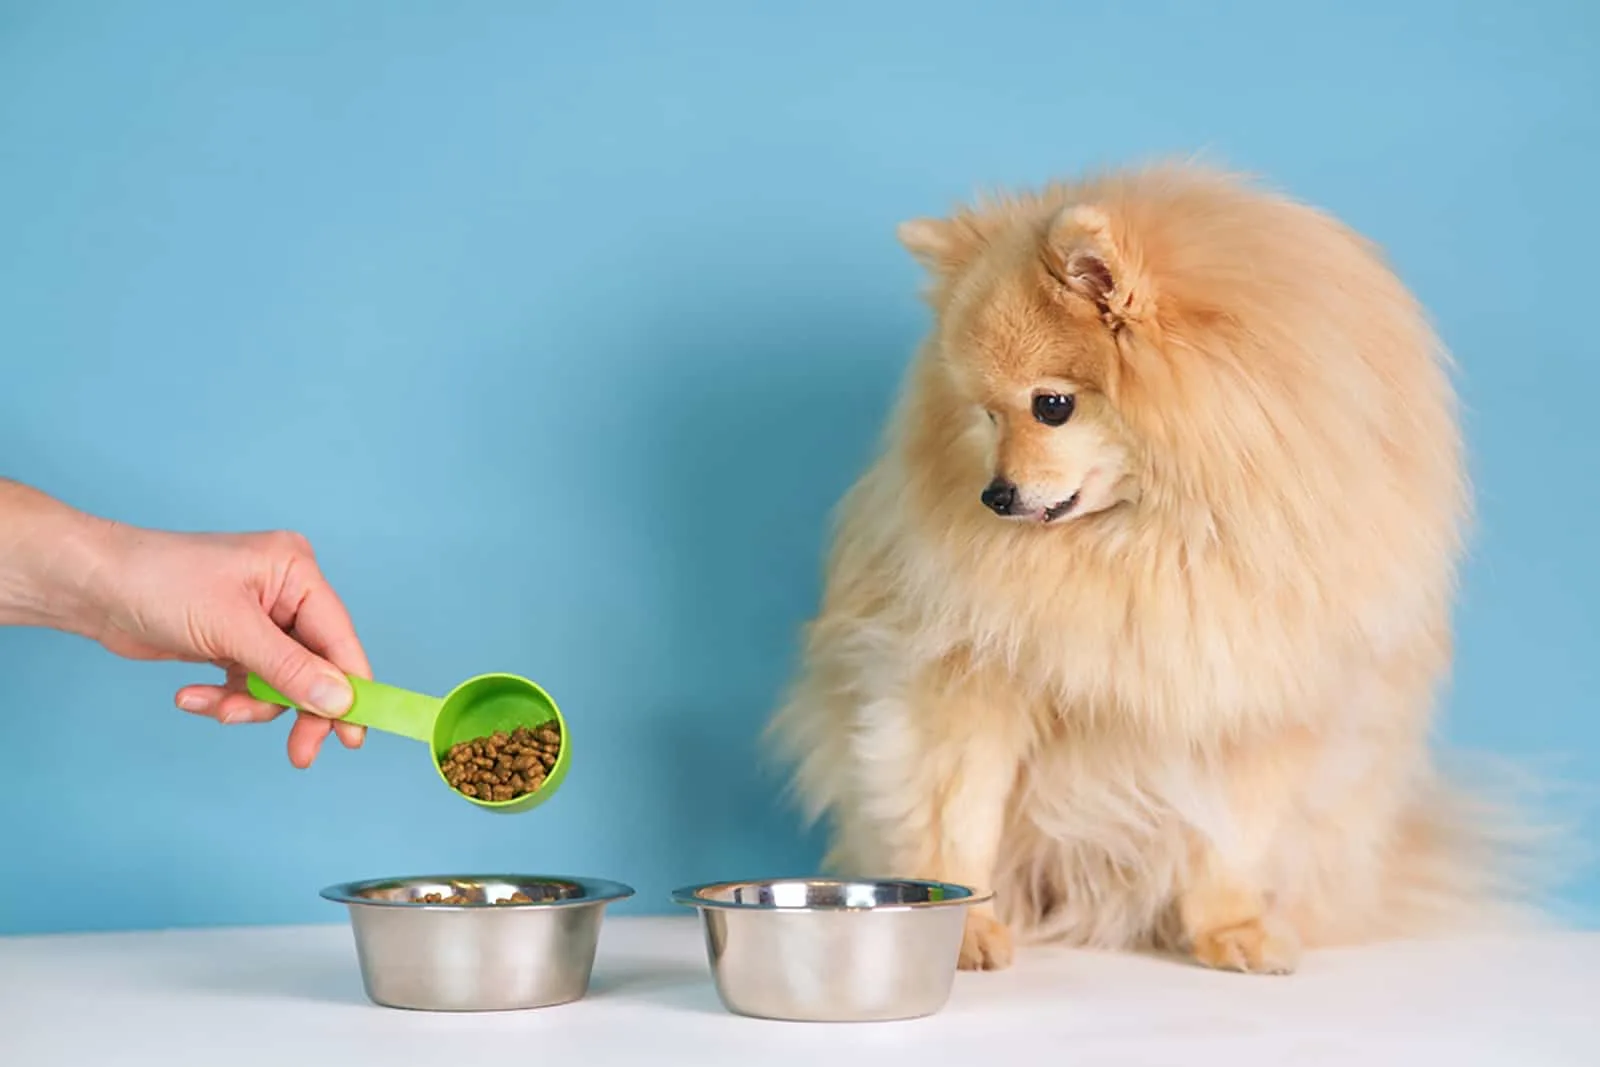  a person is feeding a pomeranian spitz dog with dry food